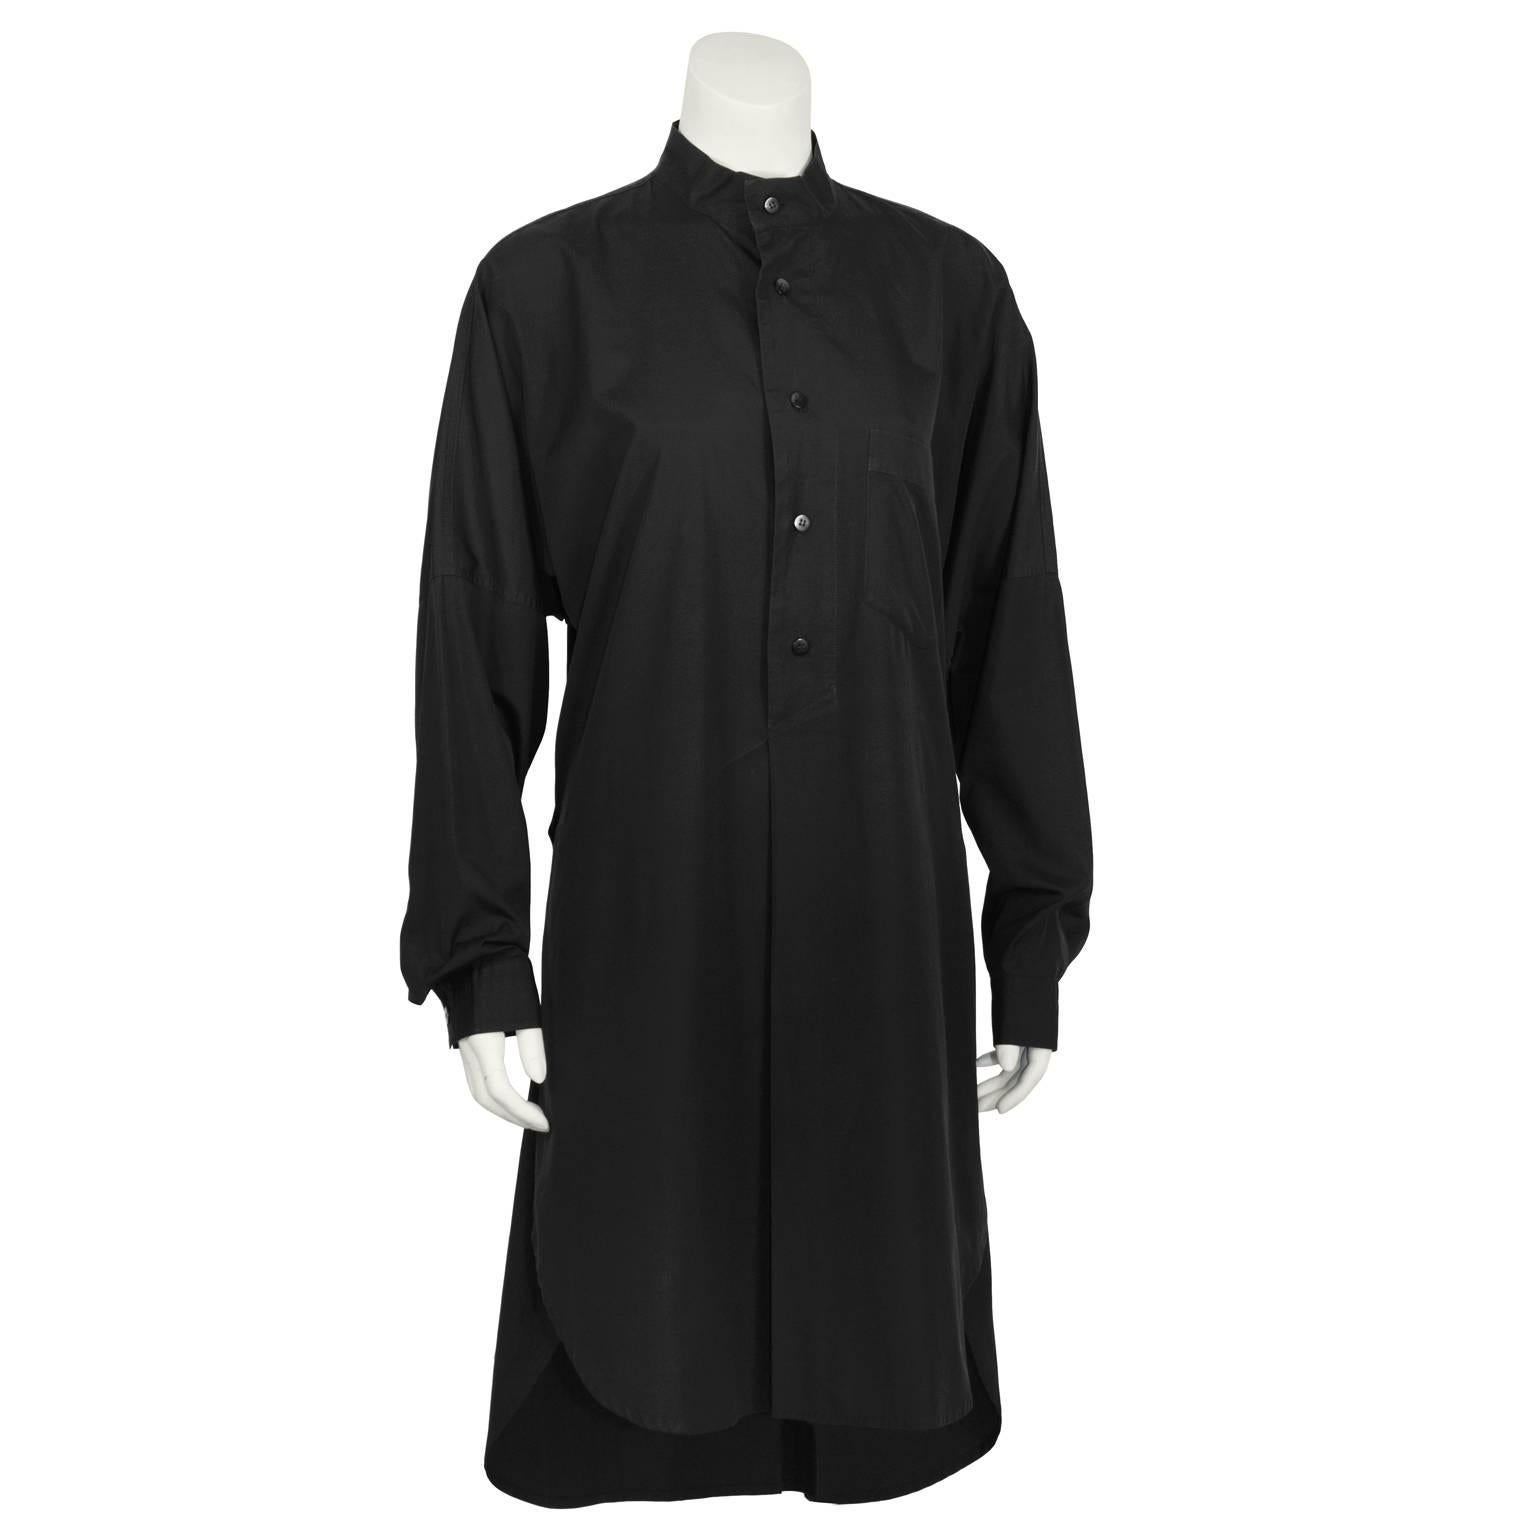 Ultra chic Plantation line by Issey Miyake black cotton tunic dress from the early 1980's featuring a button up neck with a band collar, a breast pocket, a belt around the back with an extended tail. Excellent vintage condition. Fits like a US 6-8.